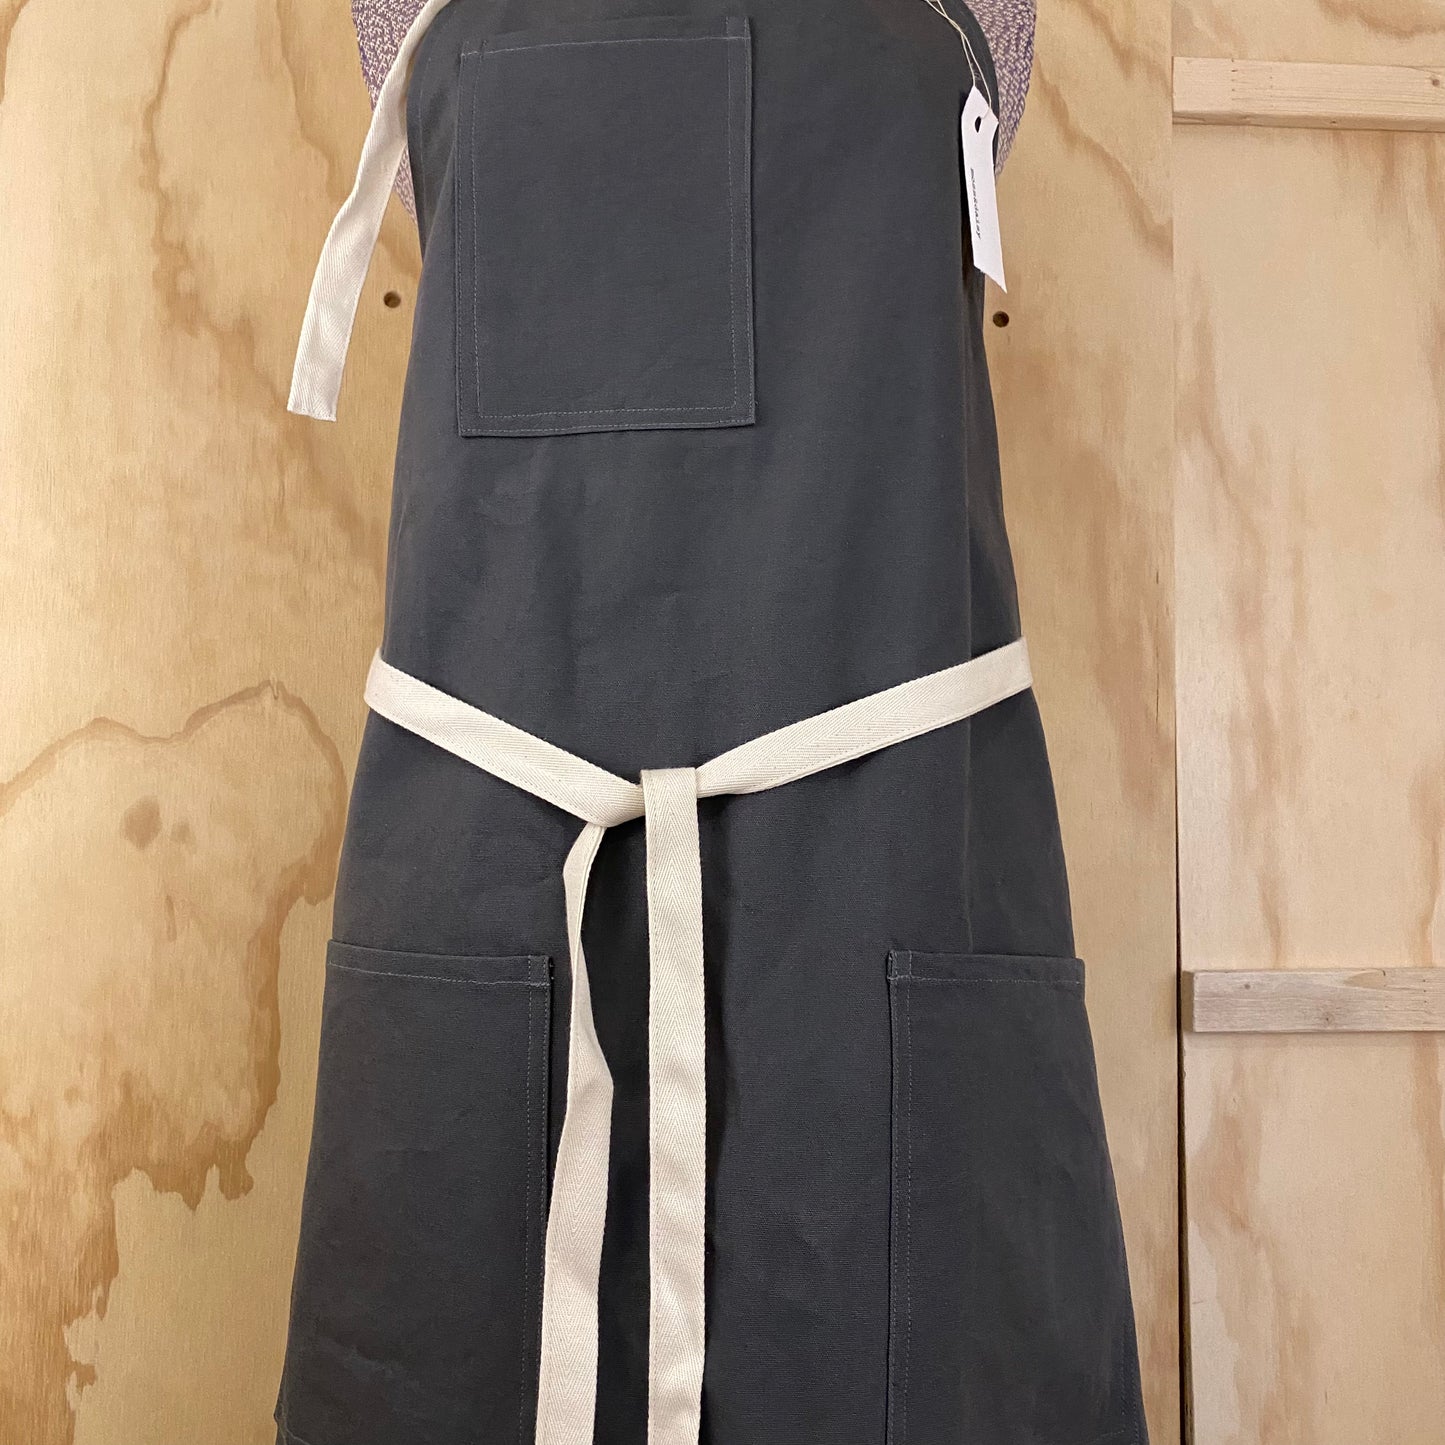 chef's utility apron with cross back straps